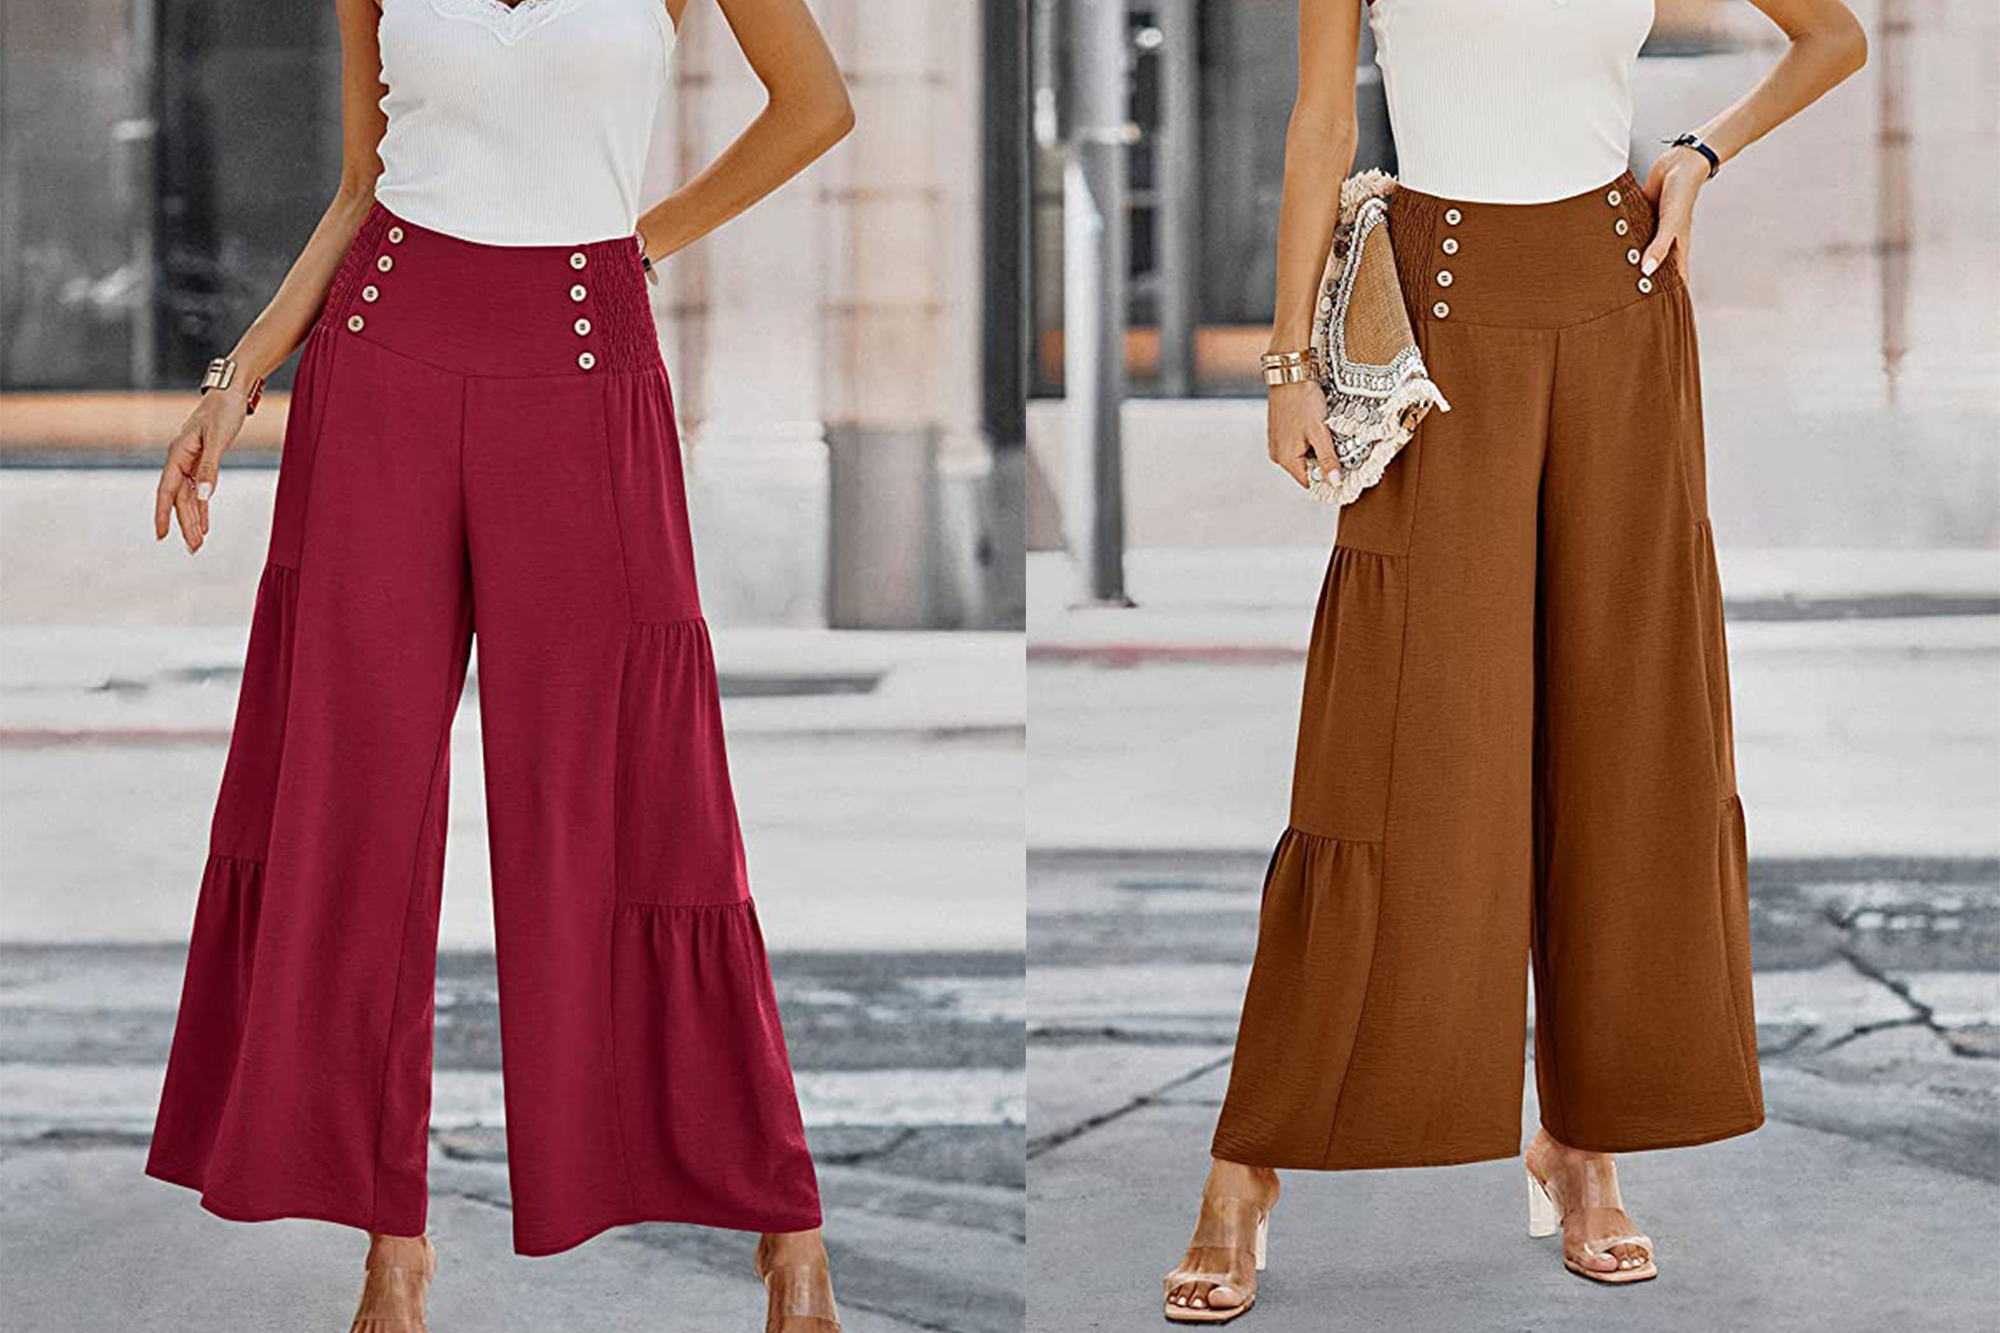 Prettygarden Lightweight Pants Are a Must for Spring